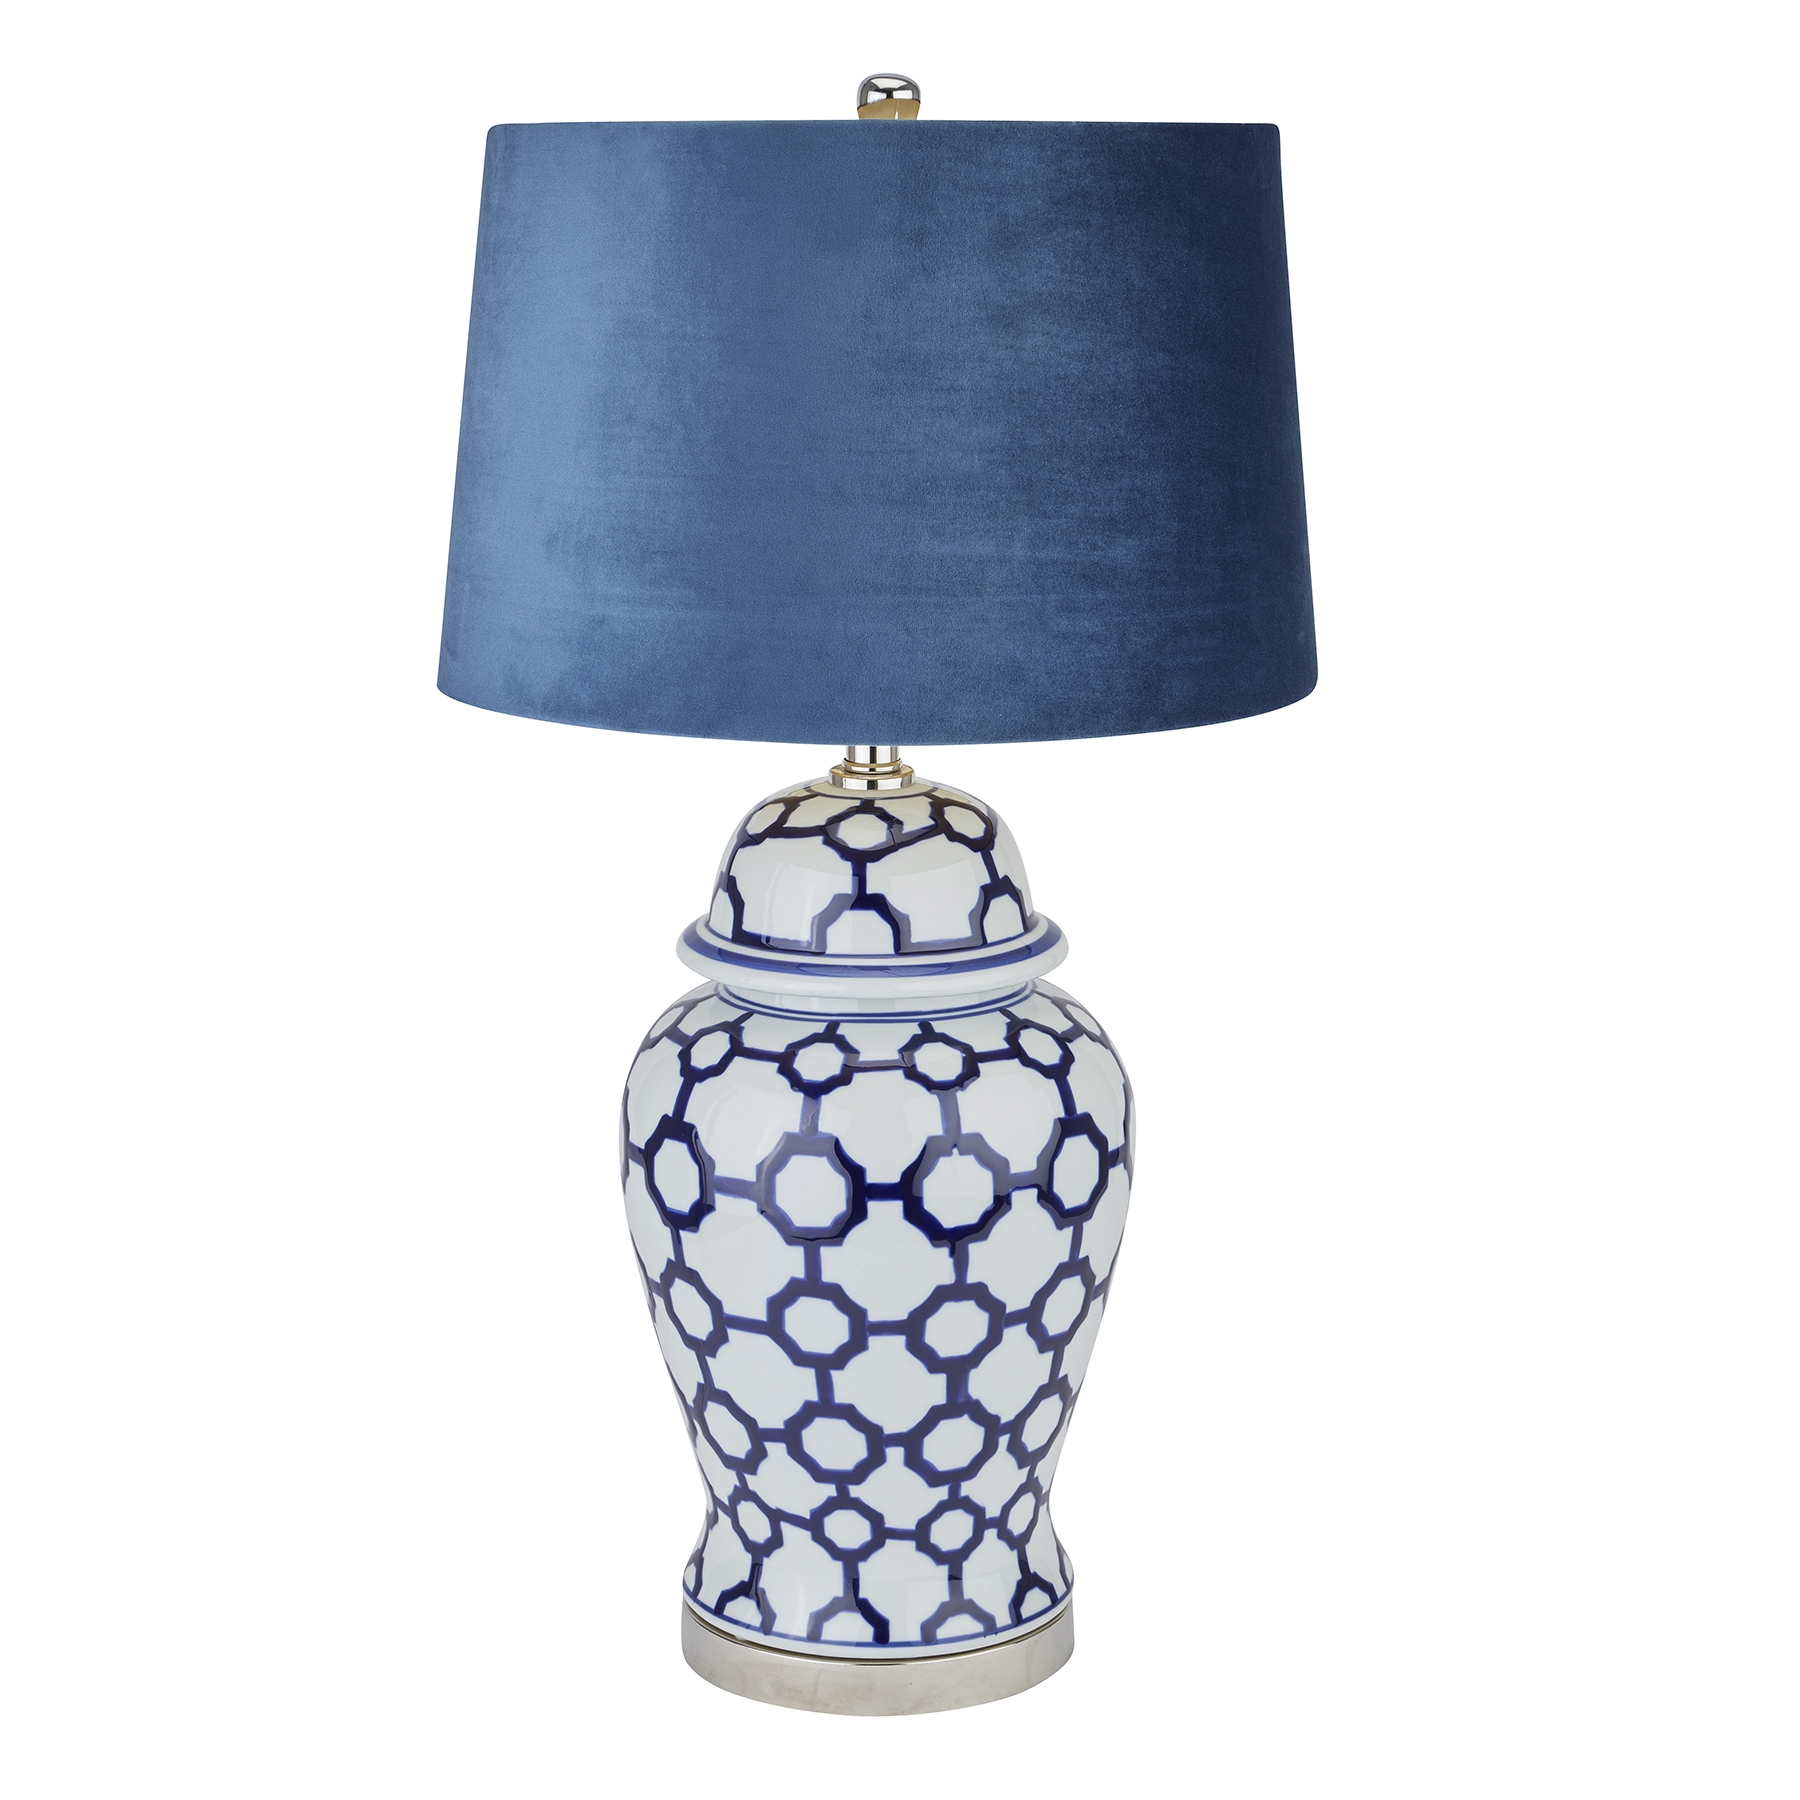 Hill Interiors Acanthus Blue And White Ceramic Lamp With Blue Velvet Shade